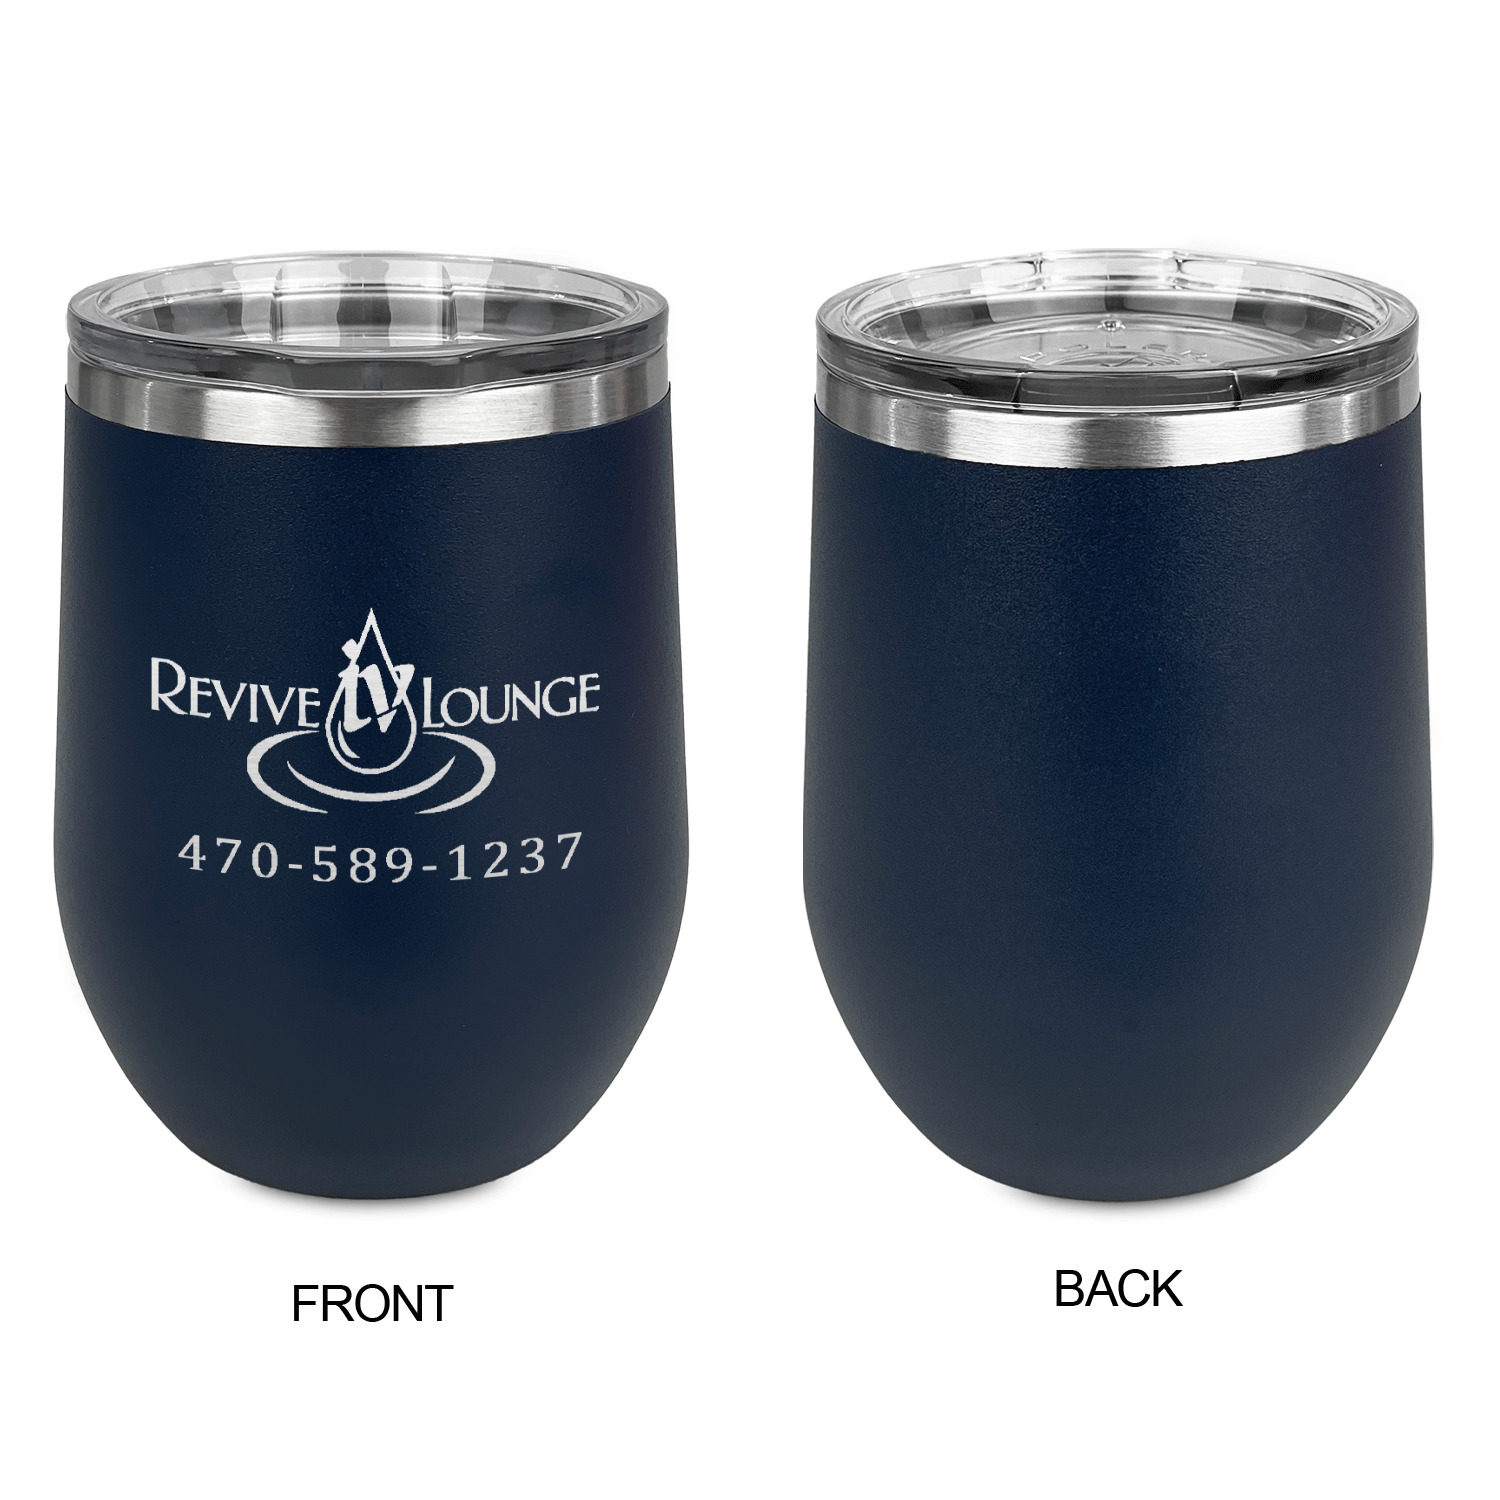 Insulated Wine Tumbler with Lid (Pearl Blue), Stemless Stainless